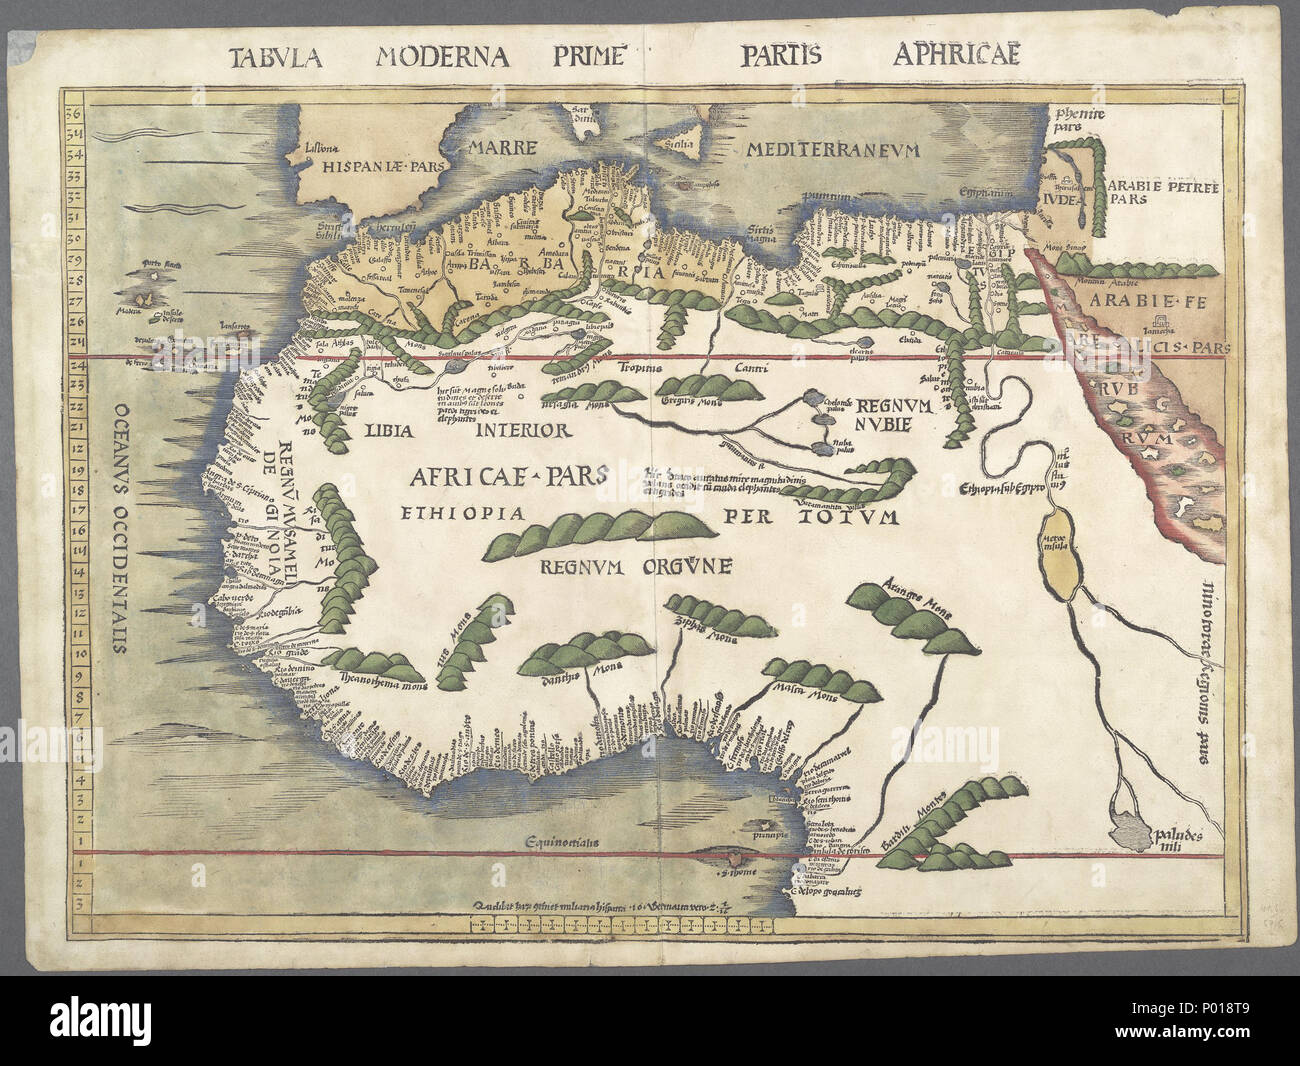 . English: A modern map of the First Part of Africa, equivalent to Ptolemy's fourth African map, p. 325 of the Strasbourg Ptolemy. 41 x 57 cm. Scale in German and Italian miles.  . 1513.   Ptolemy  (100–160)       Alternative names ????????: ???????? ?????????? Latina: Claudius Ptolemaeus  Description Roman mathematician, geographer, astronomer, astrologer, music theorist and philosopher  Date of birth/death circa 100 circa 160  Location of birth/death Pelusium Alexandria  Authority control  : Q34943 VIAF:?54152998 ISNI:?0000 0001 2280 0429 ULAN:?500330559 LCCN:?n50032768 GND:?118641786 WorldC Stock Photo